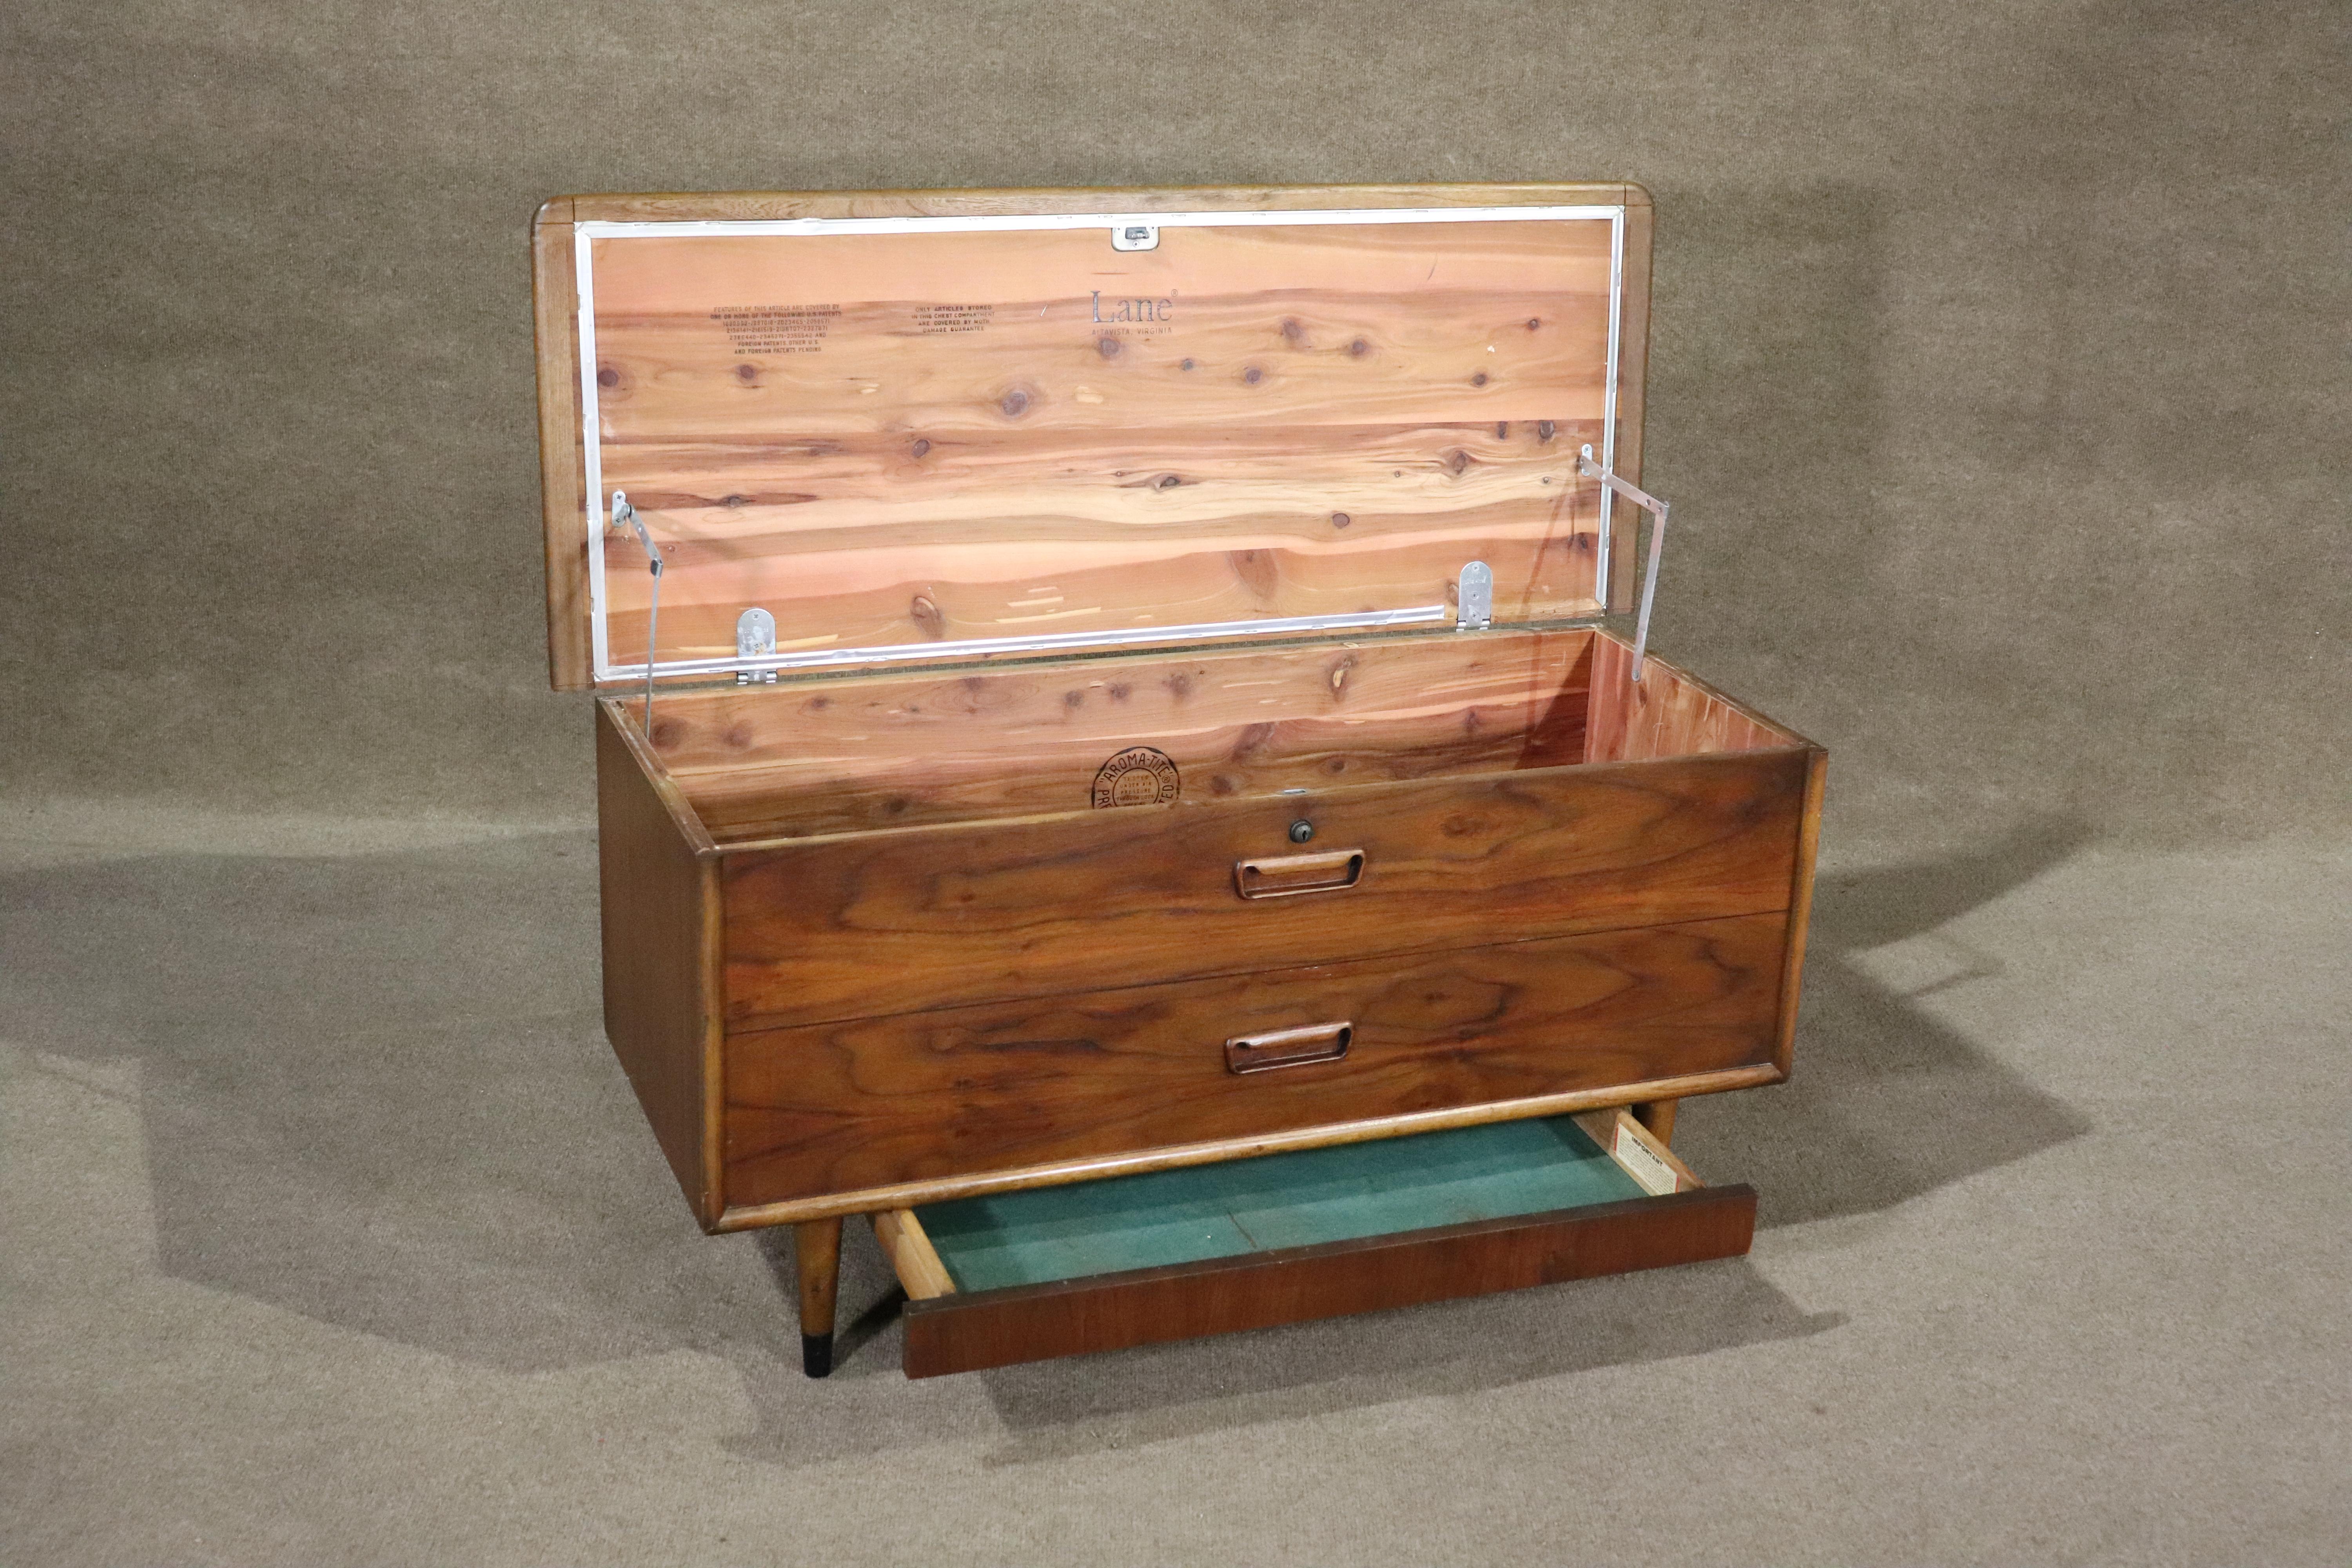 Mid-century flip top cedar chest by Lane Furniture. Iconic oak on walnut dovetails, designed by Andre Bus. This can be used at the foot of your bed or as living room storage.
Please confirm location NY or NJ.